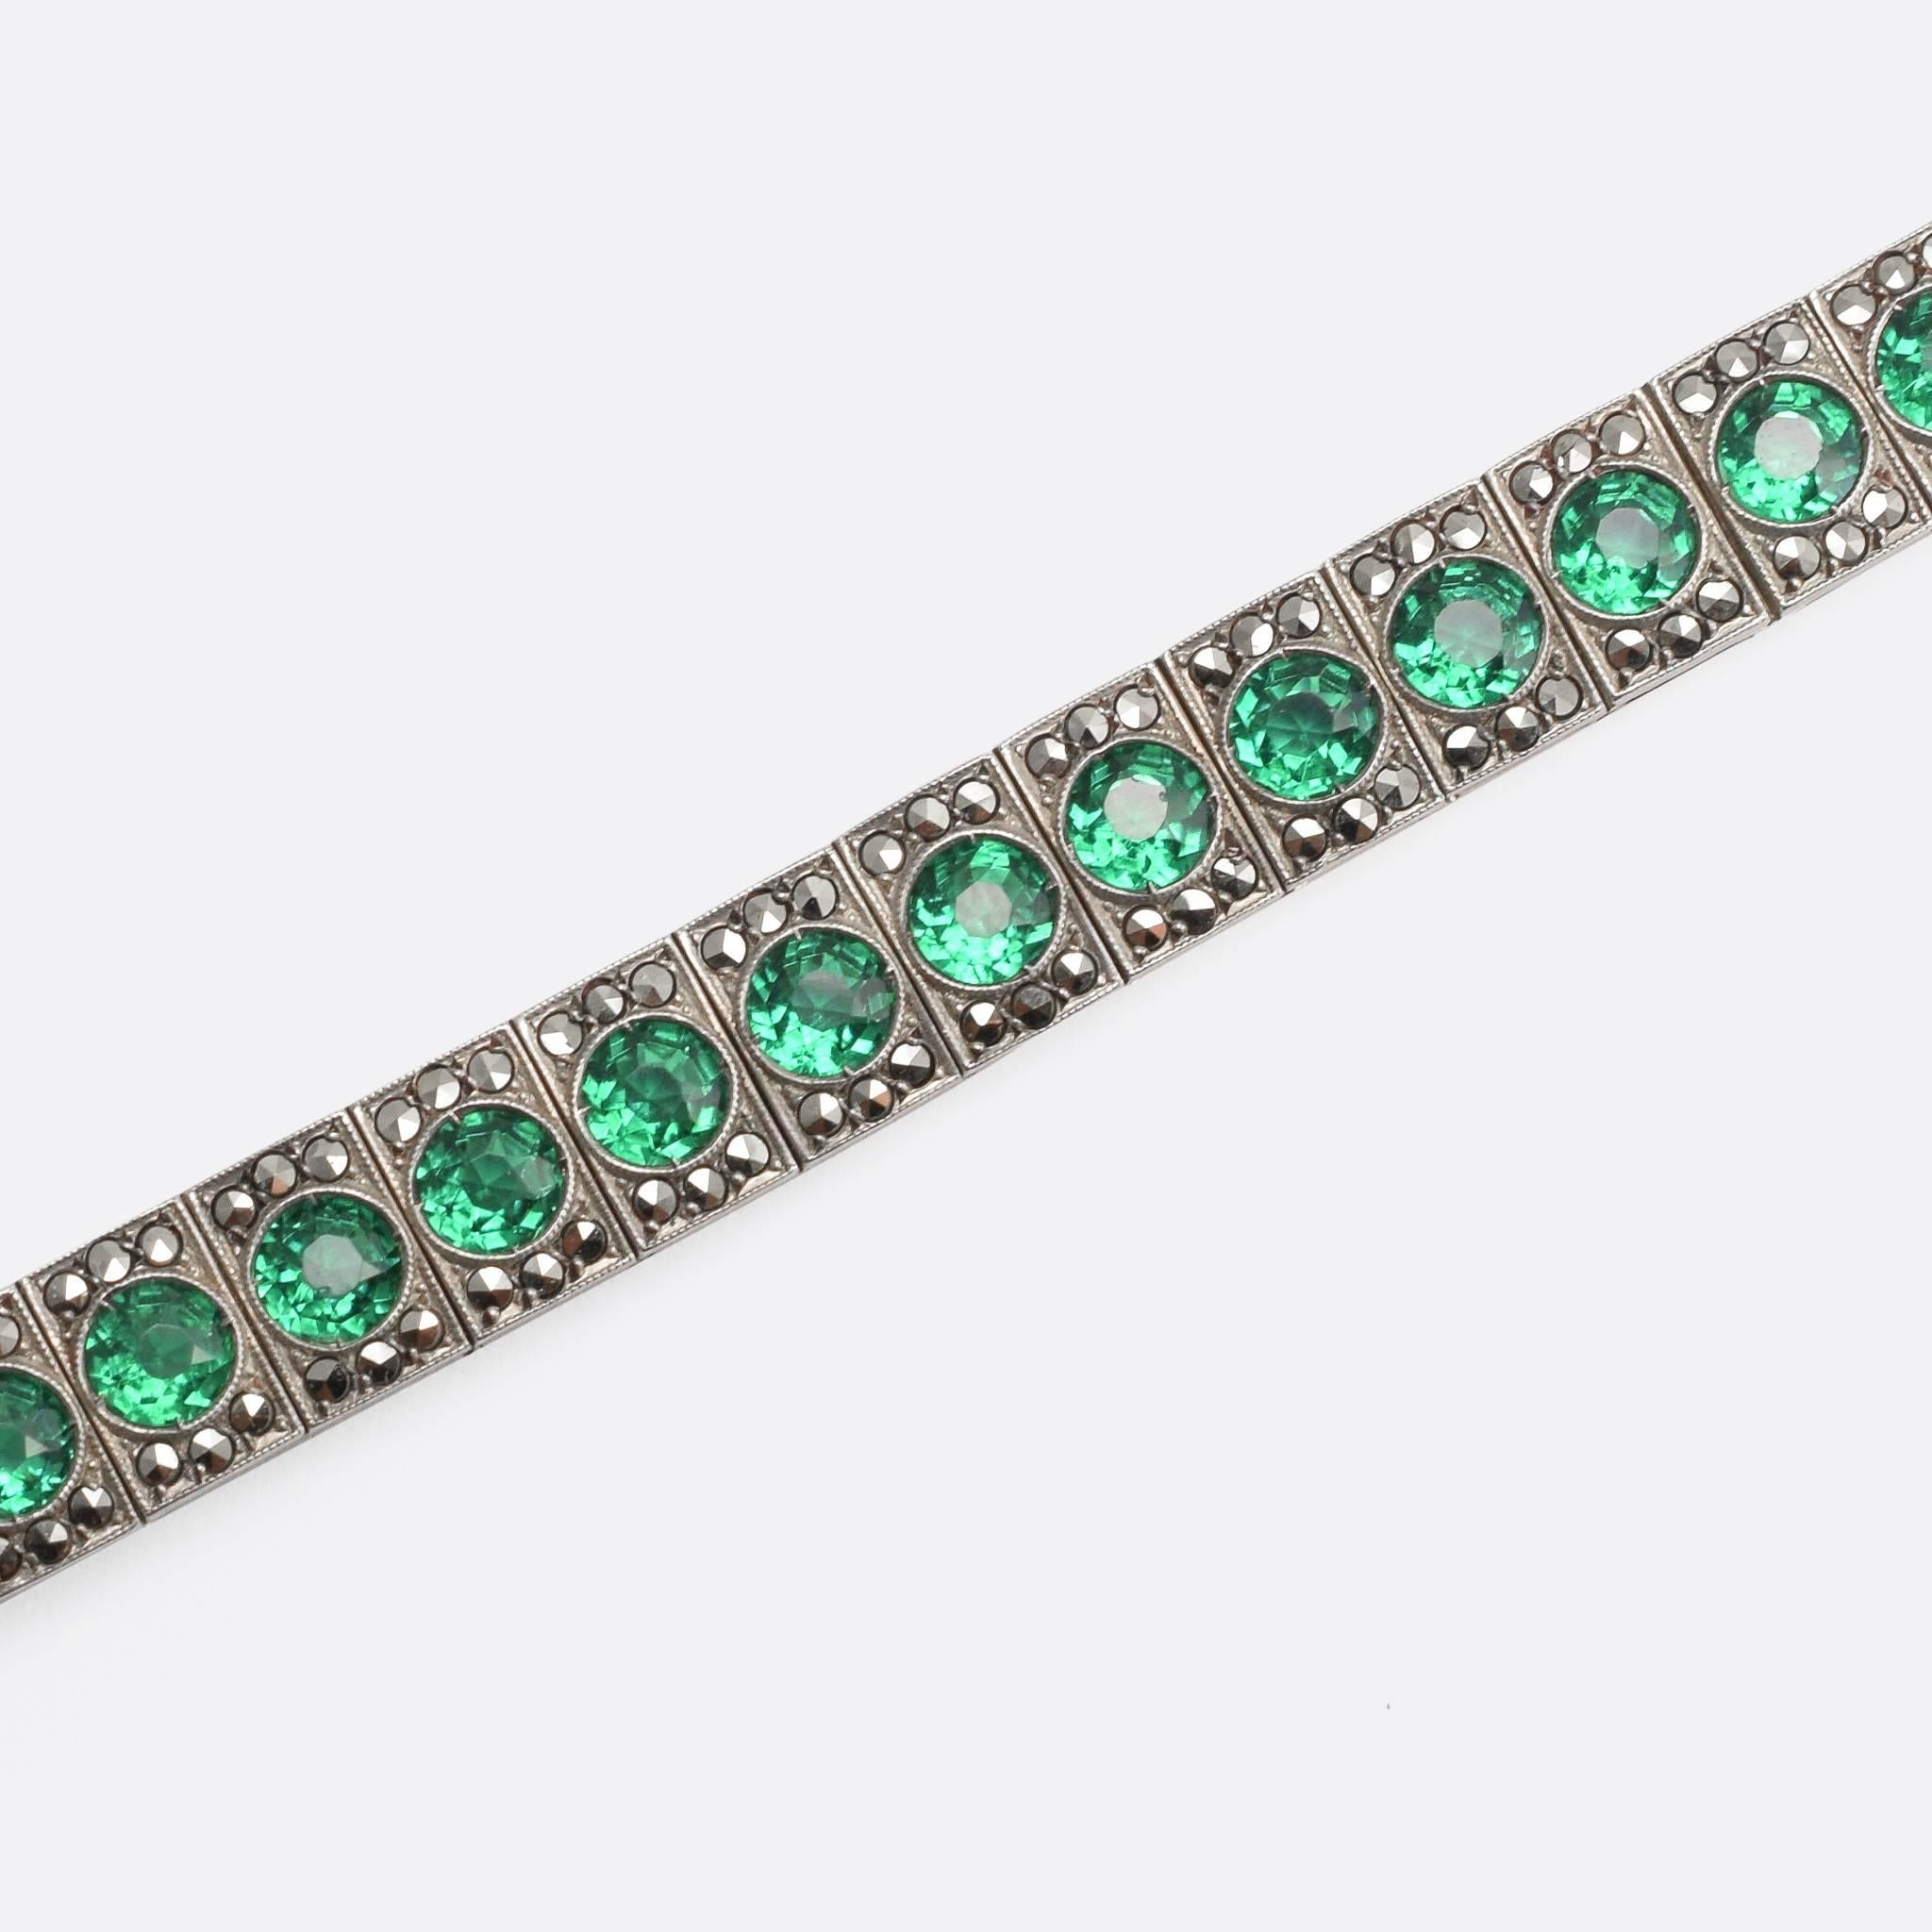 This stylish 1920s tennis bracelet is modelled in sterling silver, and set with 28 vibrant green paste stones - each accented with six faceted marcasite discs. In typical Art Deco fashion, the settings are finished with fine millegrain detail.